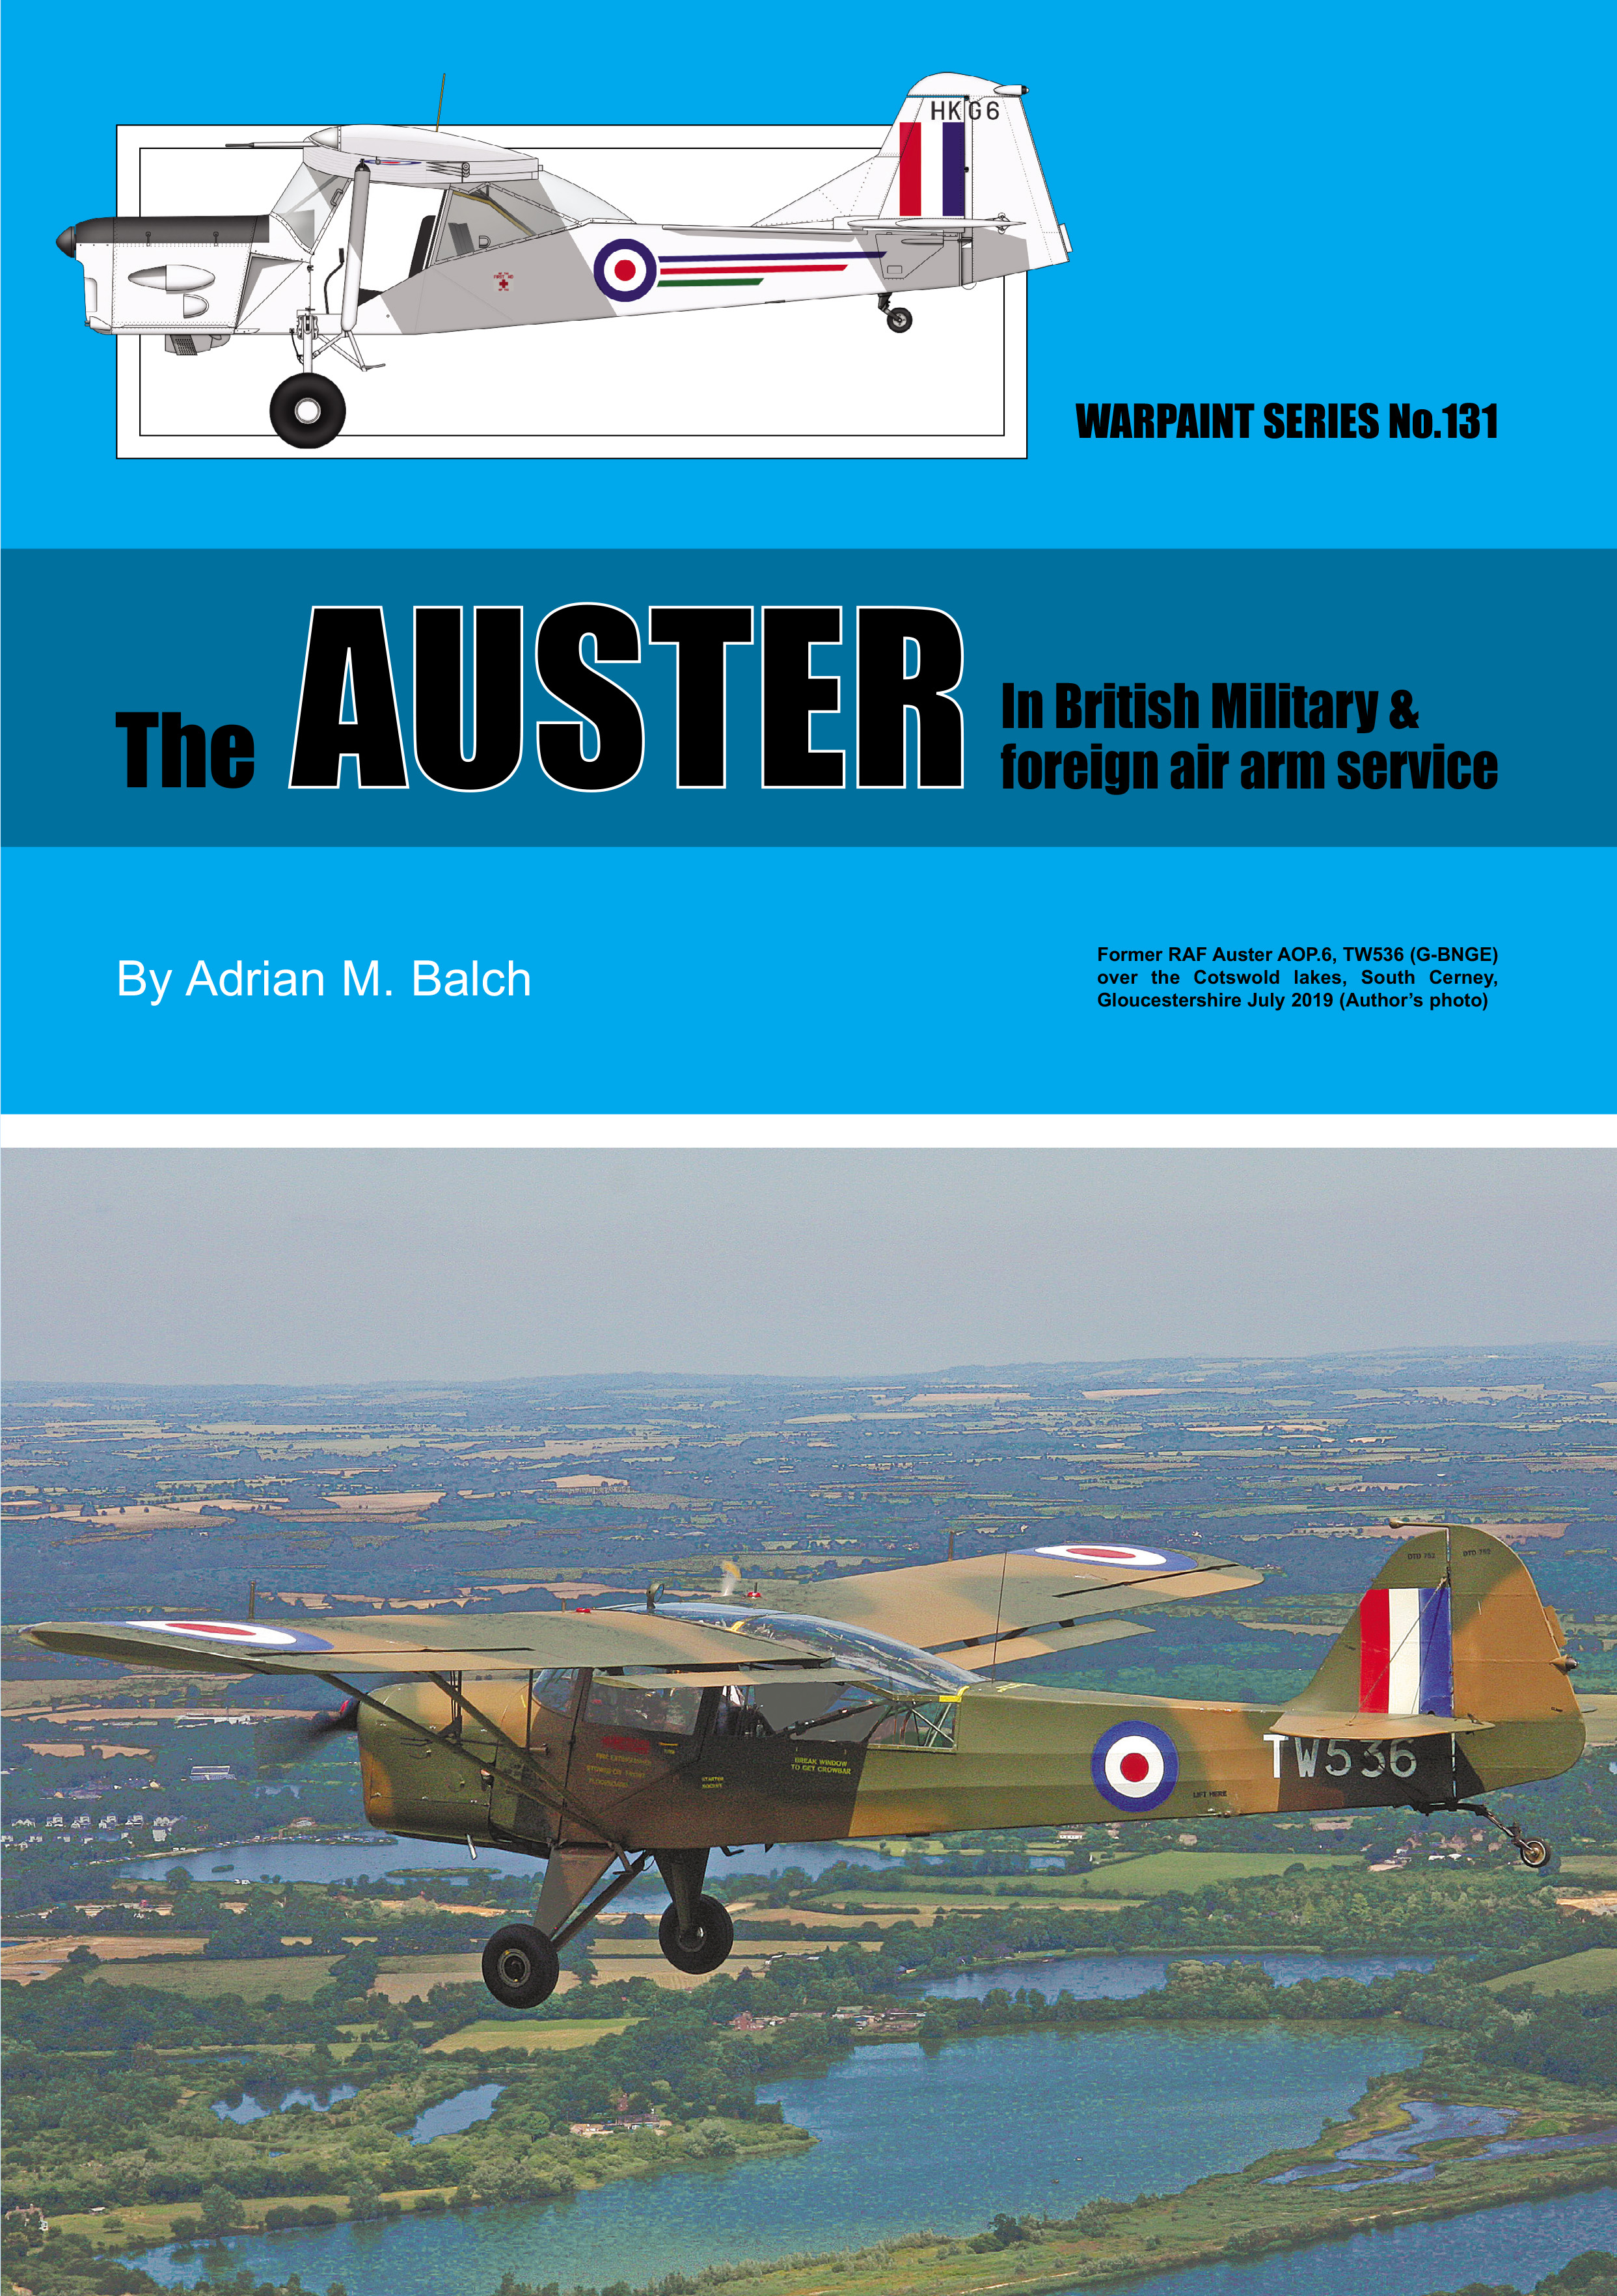 Guideline Publications Ltd Warpaint 131 - The AUSTER In British Military & foreign air arm service 